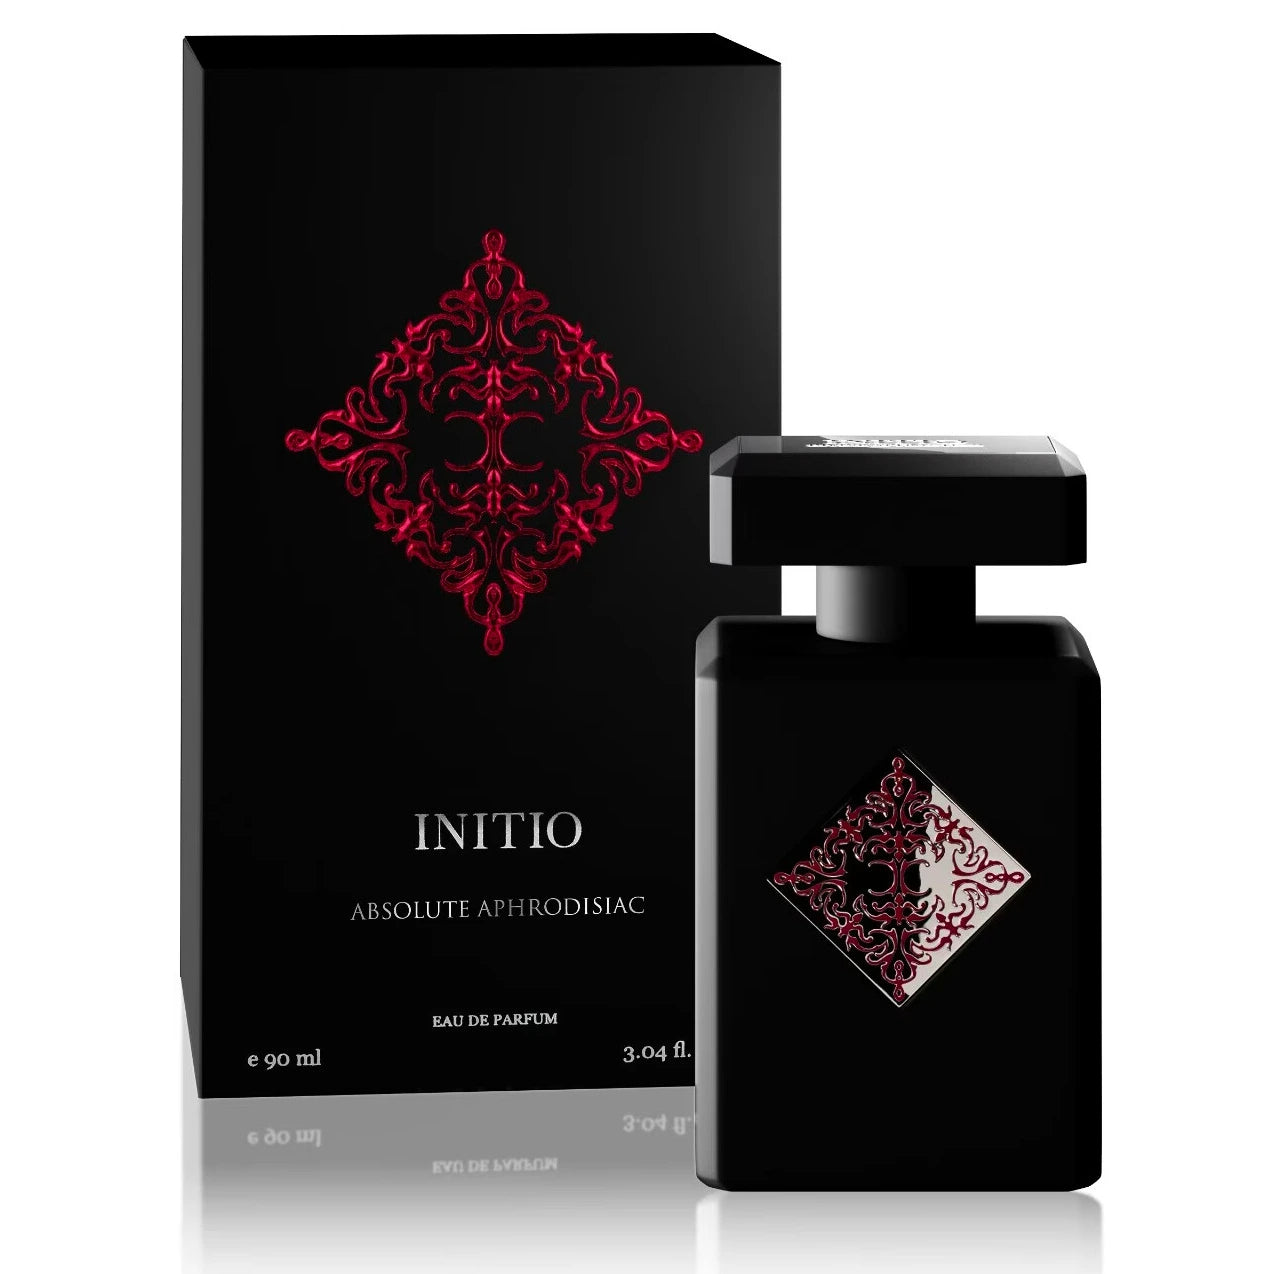 <span data-mce-fragment="1">The softness of Vanilla intimately intertwined with the animal potency of Musk and Castoreum. A powerful fragrance that obsessively reminds you of the other. A truly aphrodisiac essence.</span>